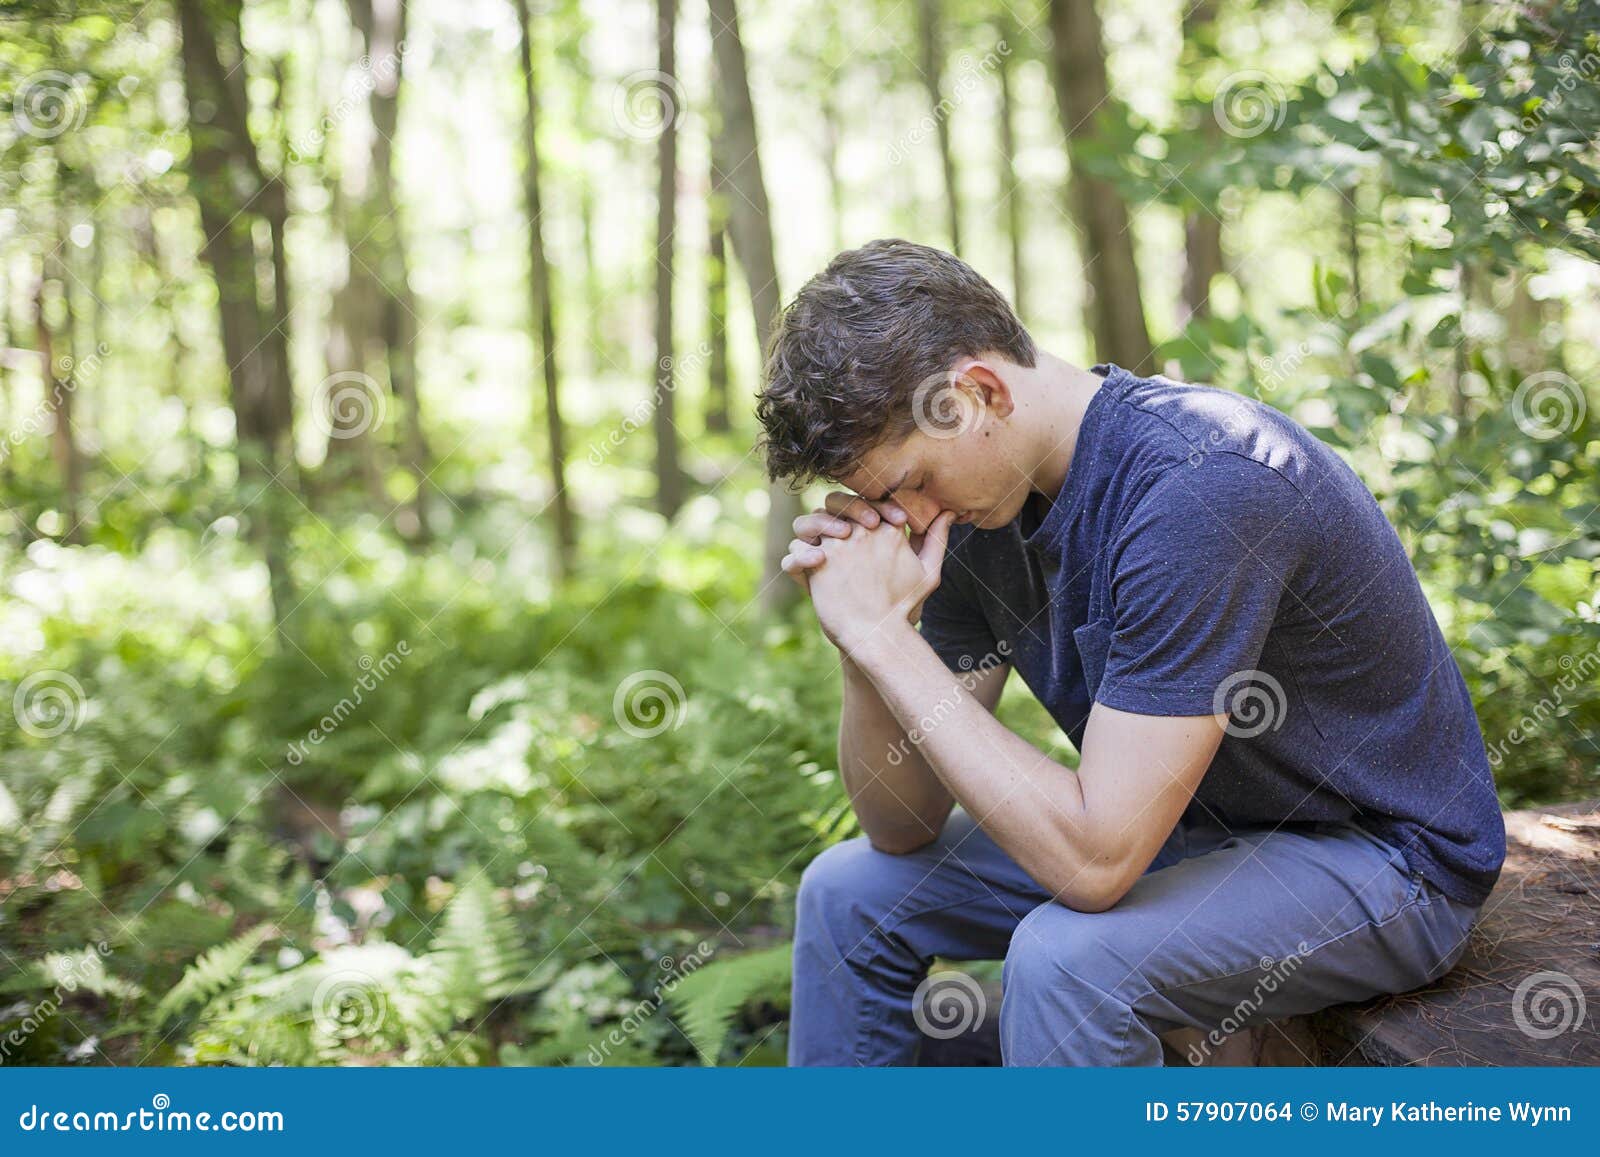 young man in prayer